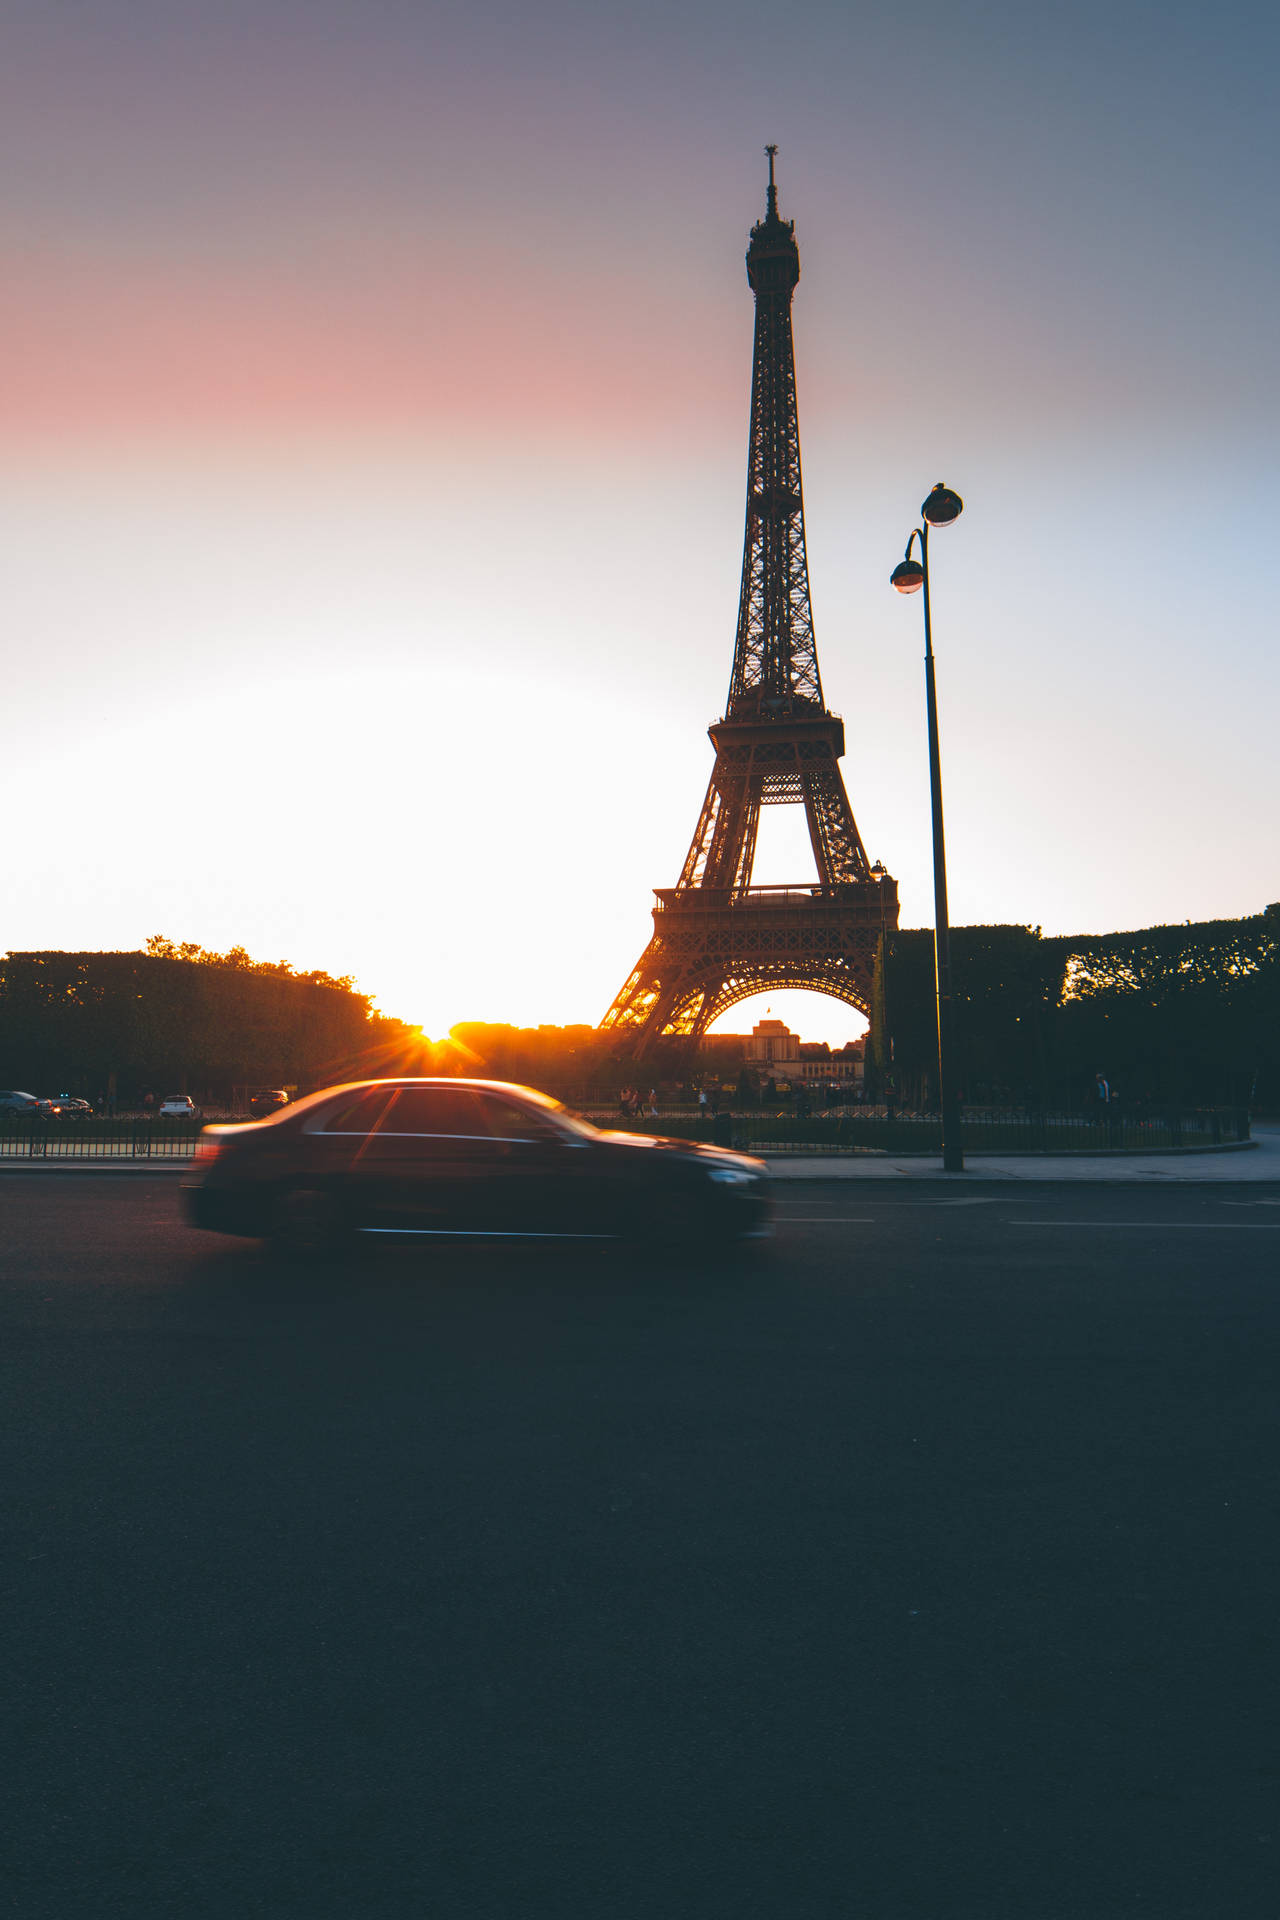 Traffic Jam And Eiffel Tower In Paris, France Wallpaper